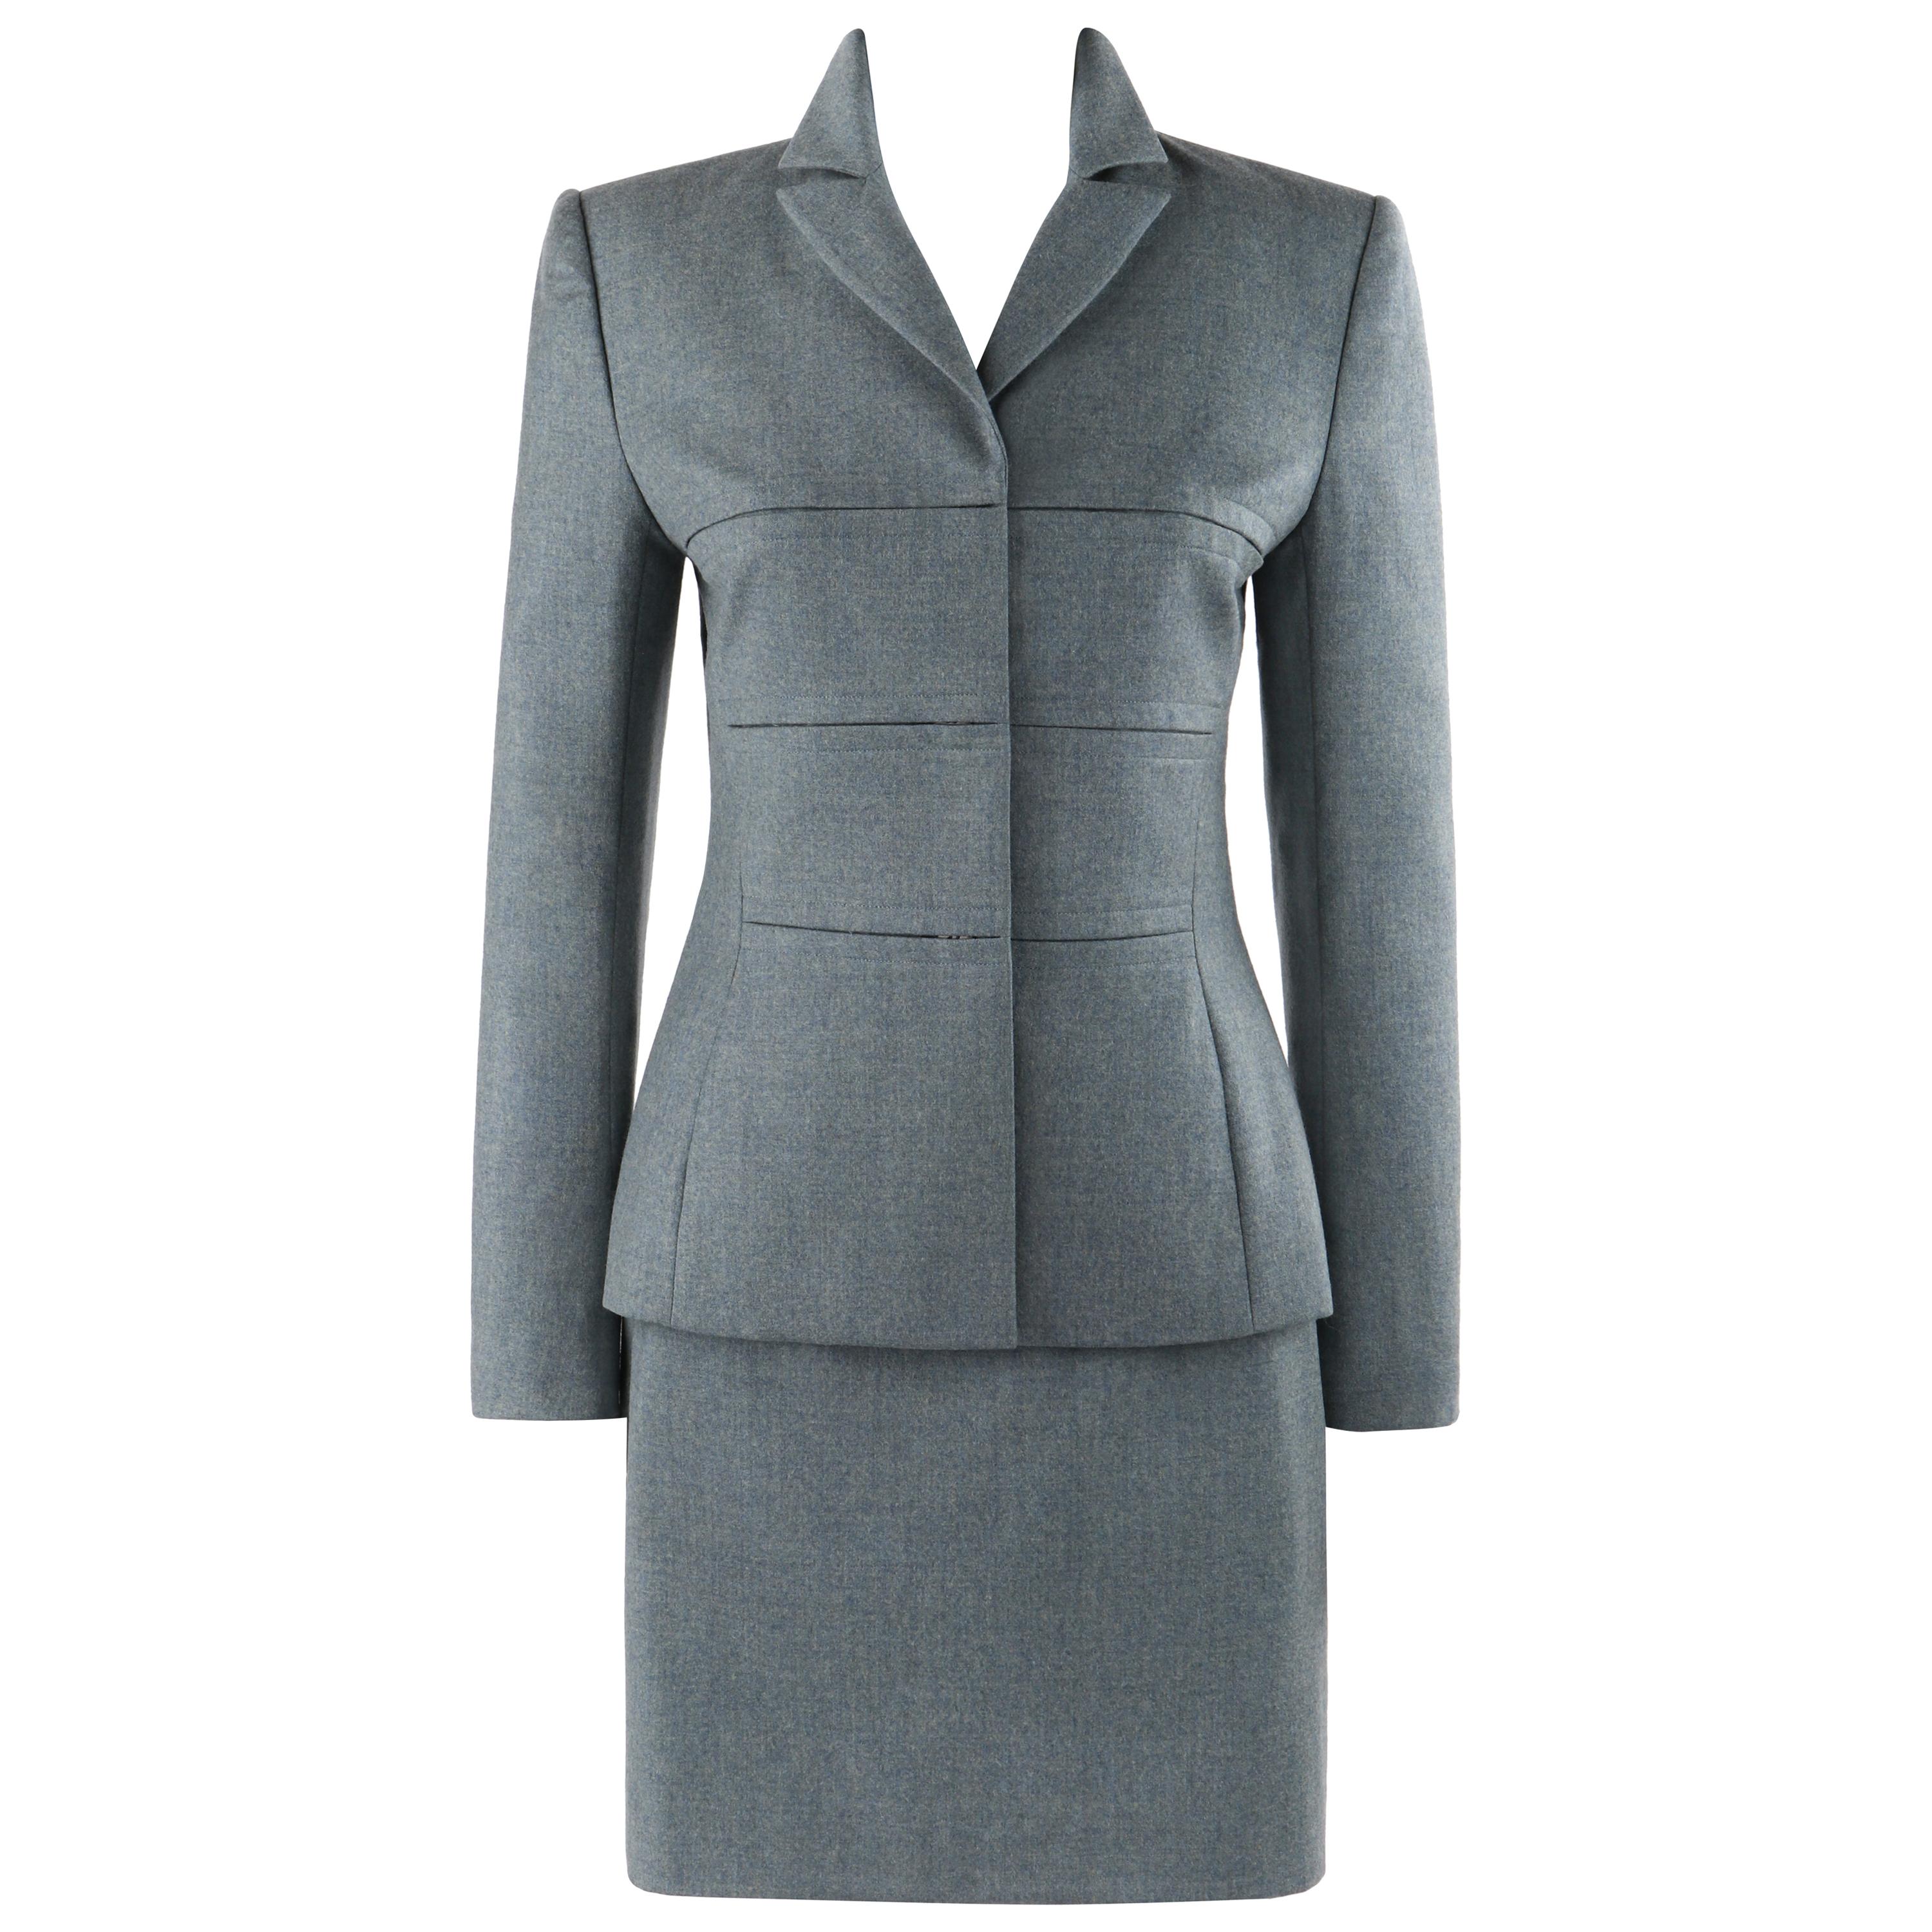 GIVENCHY Couture A/W 1998 ALEXANDER McQUEEN Blue Gray Tailored Blazer Skirt Suit